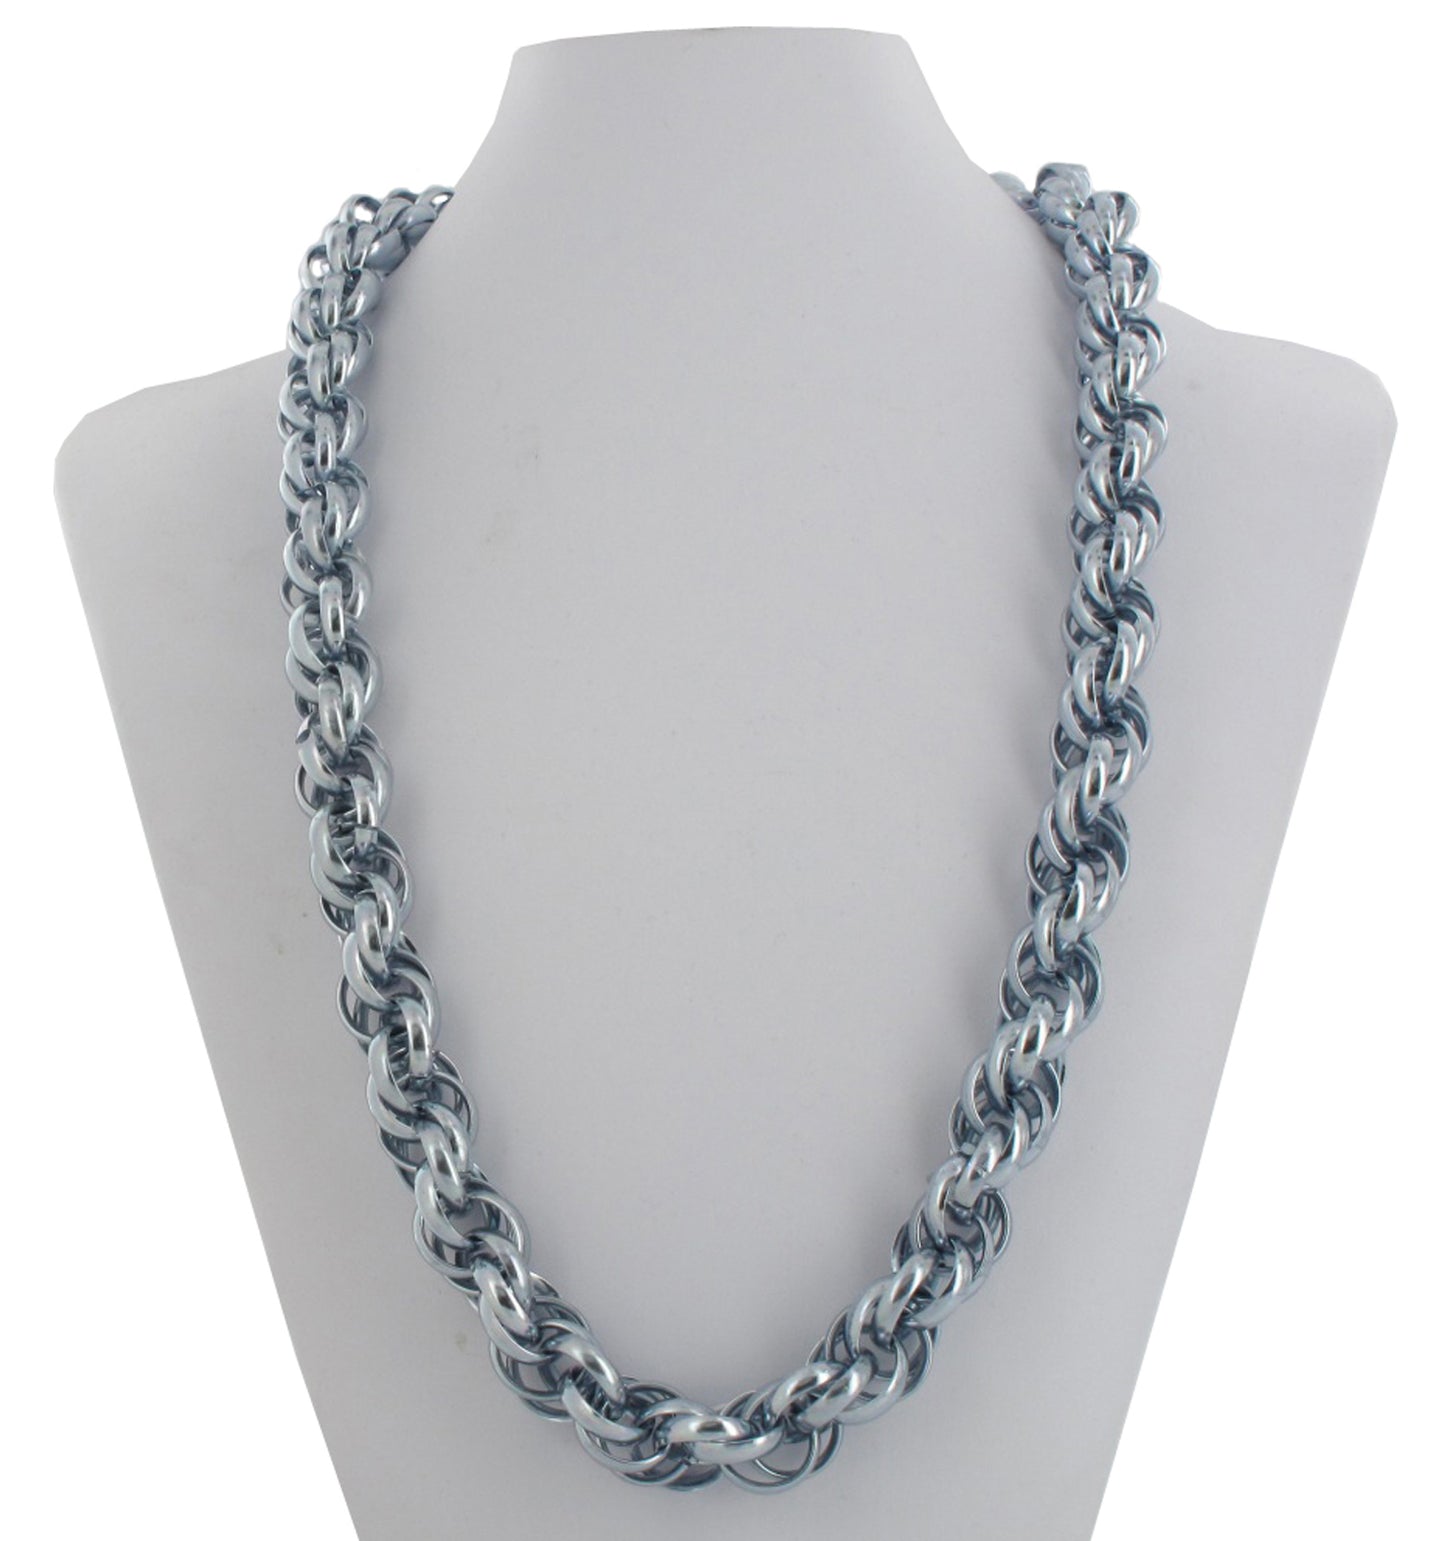 Large Oversized Rope Chain Necklace Chunky Wide Silver Tone 28"